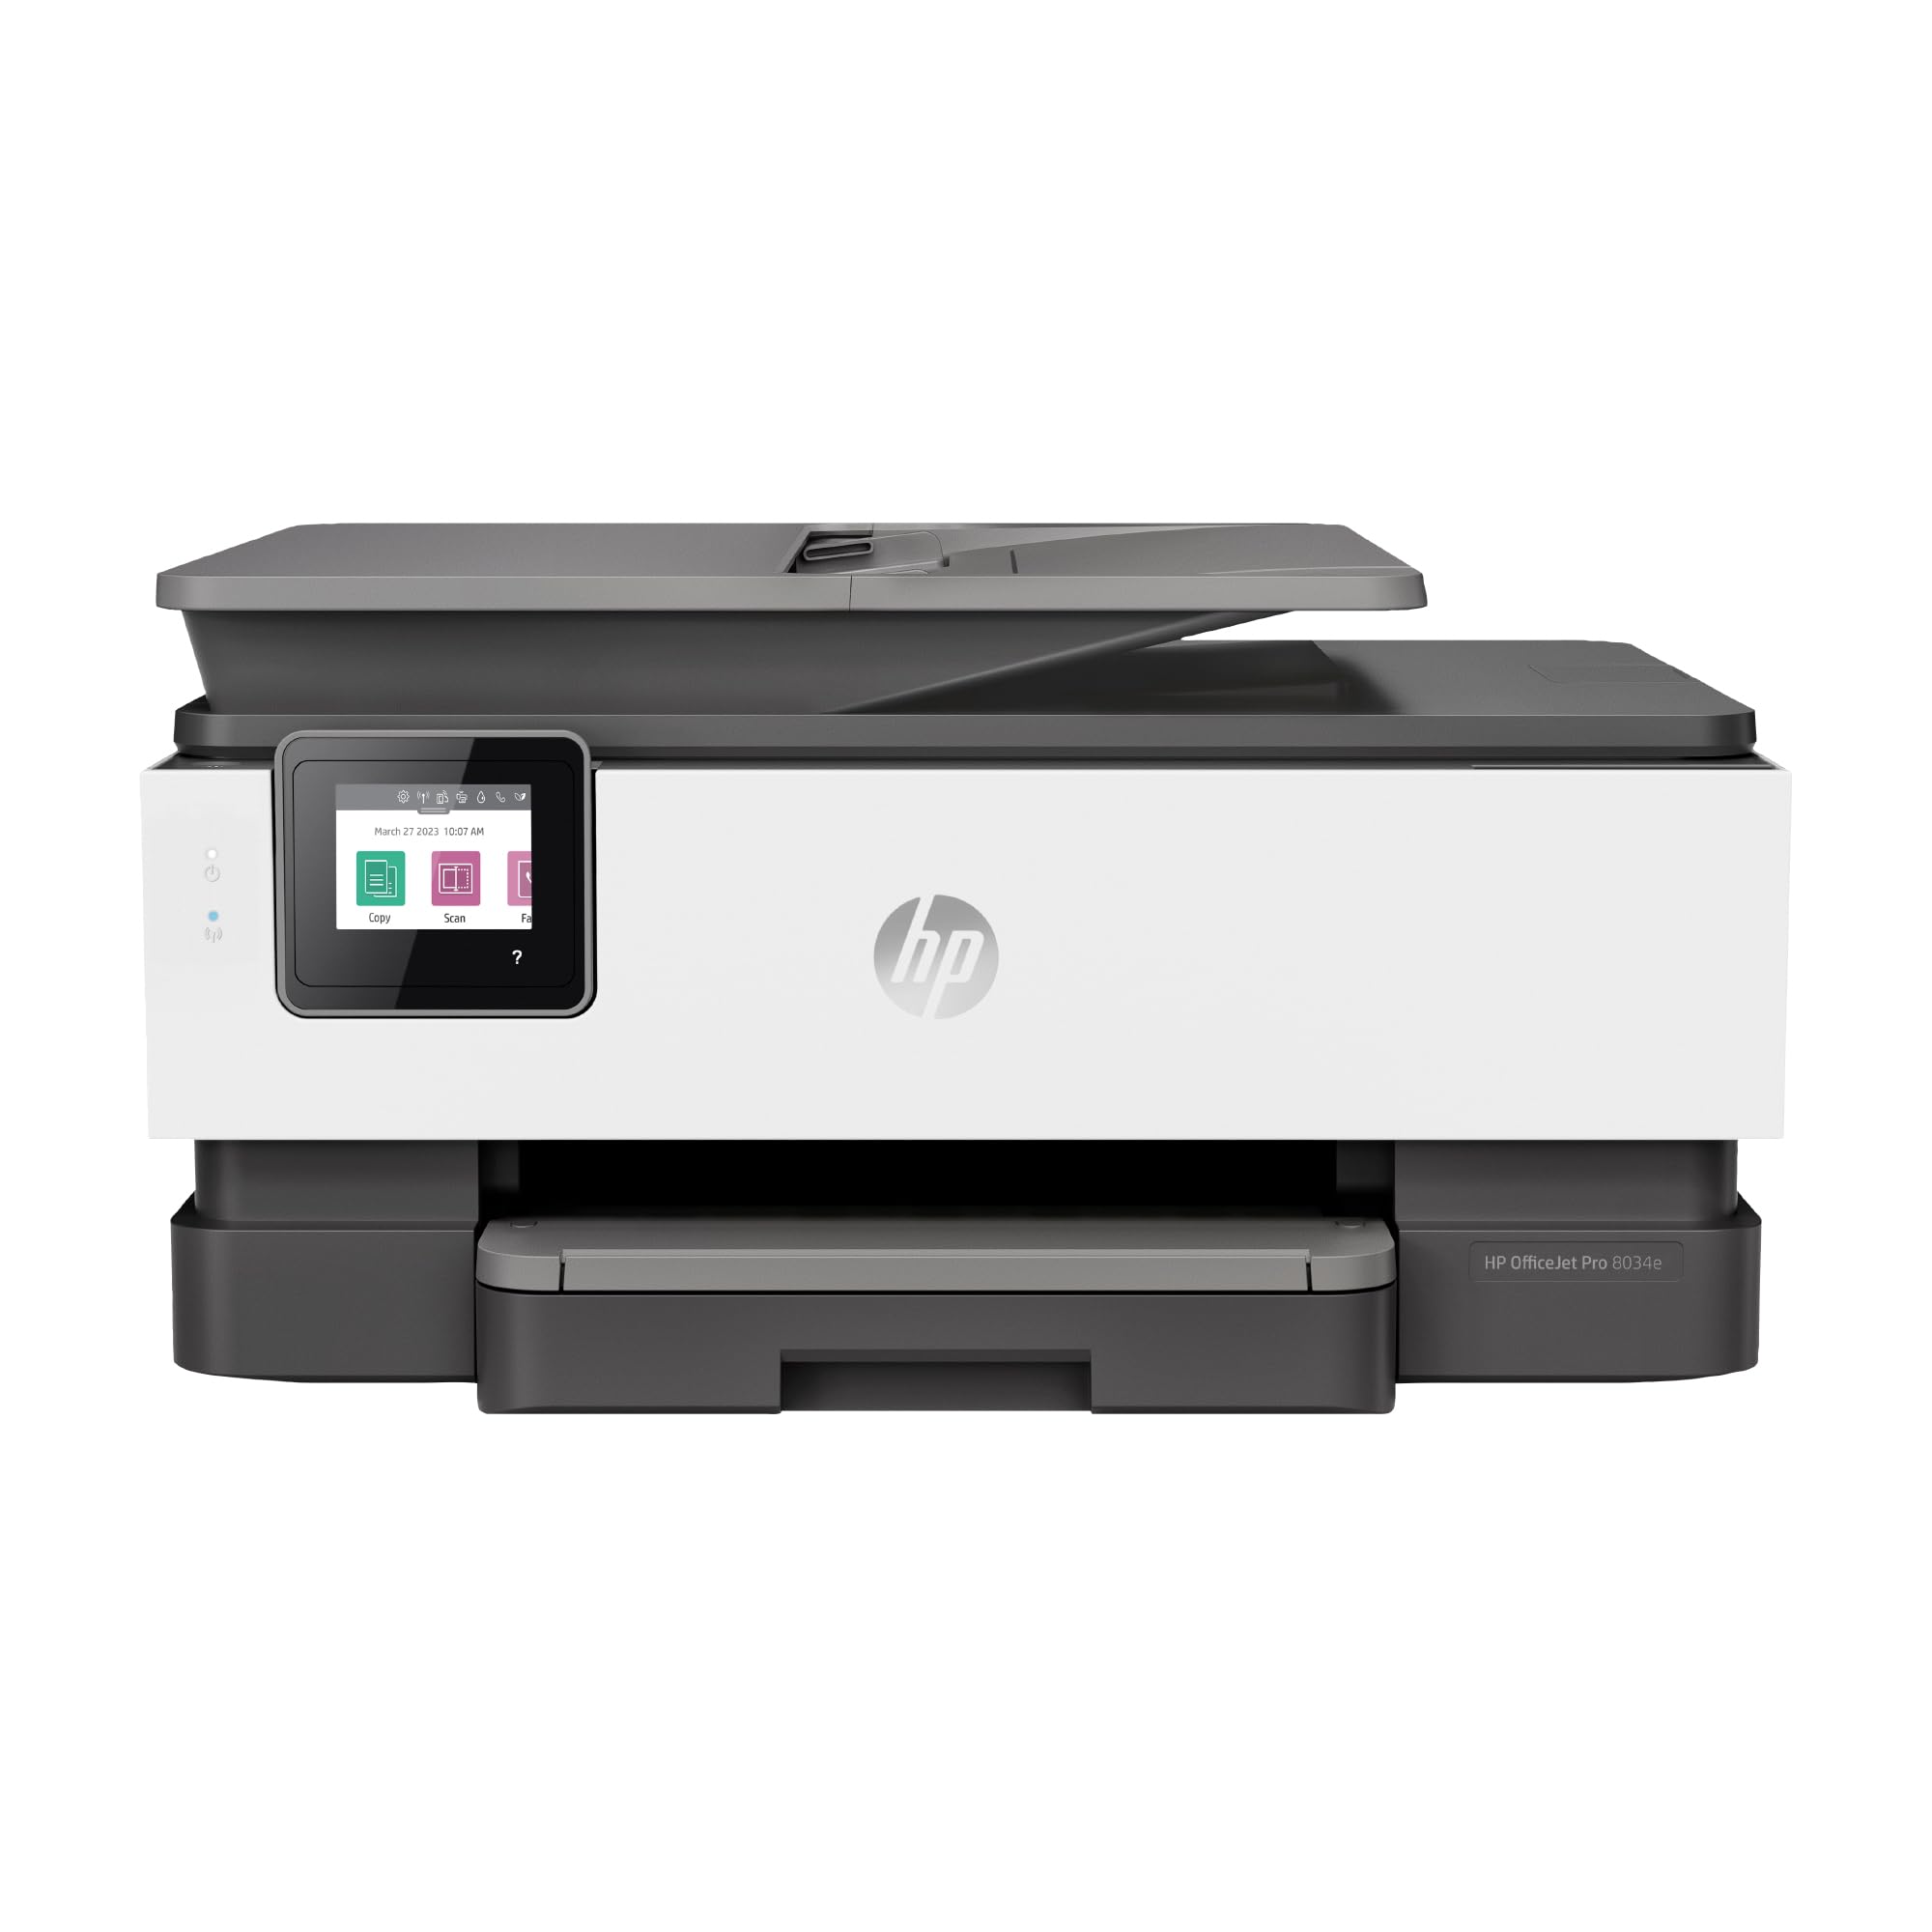 HP OfficeJet Pro 8034e Wireless Color All-in-One Printer with 1 Full Year Instant Ink,White New